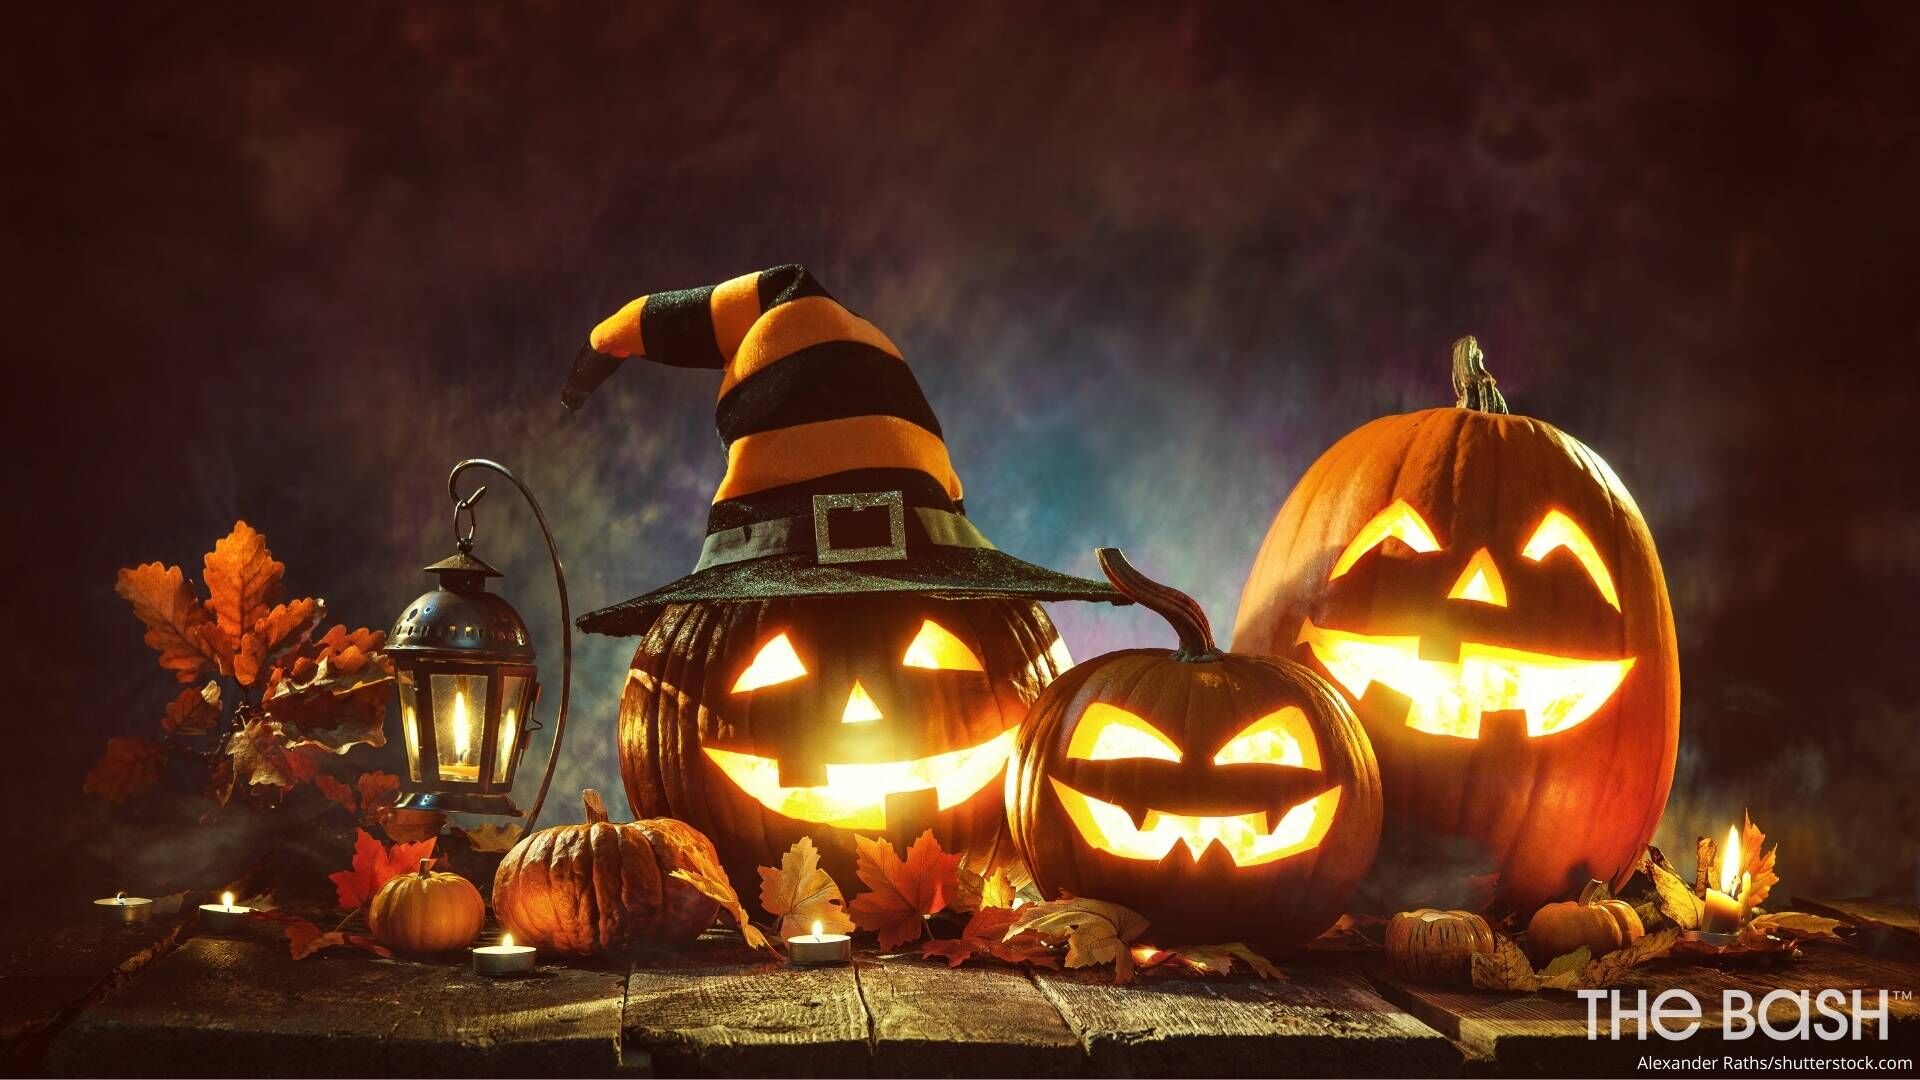 halloween witch wallpapers hd